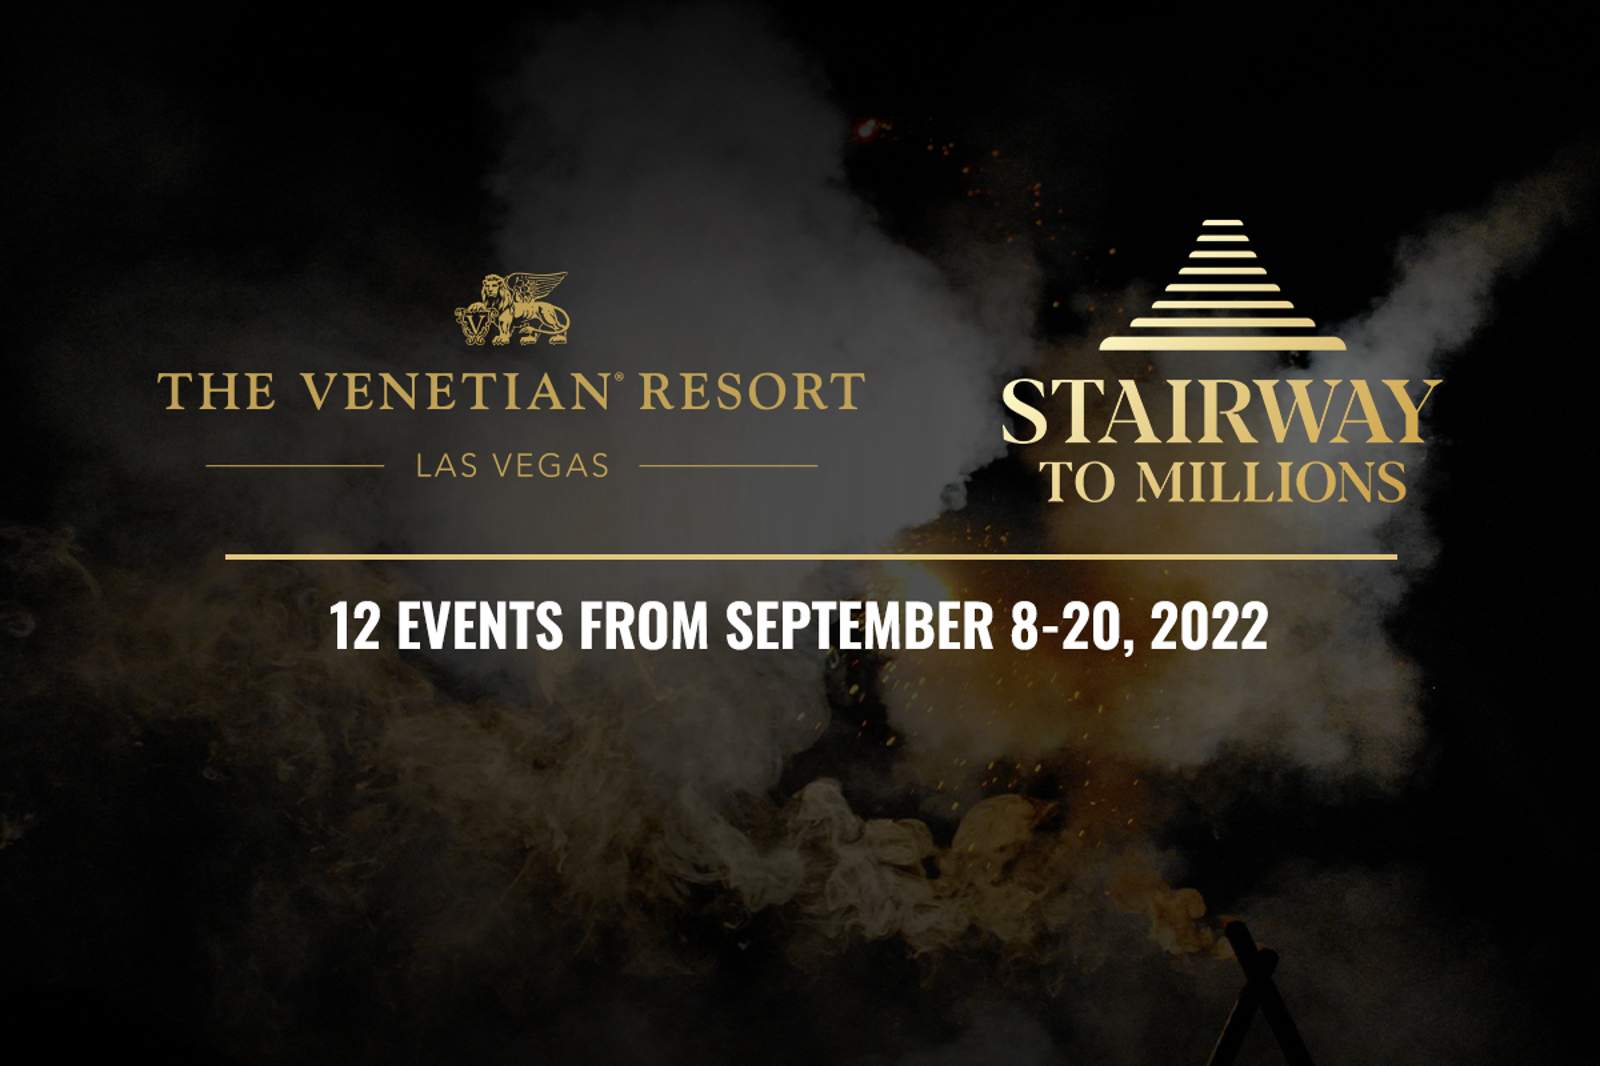 Stairway To Millions Begins On Thursday at The Venetian Resort